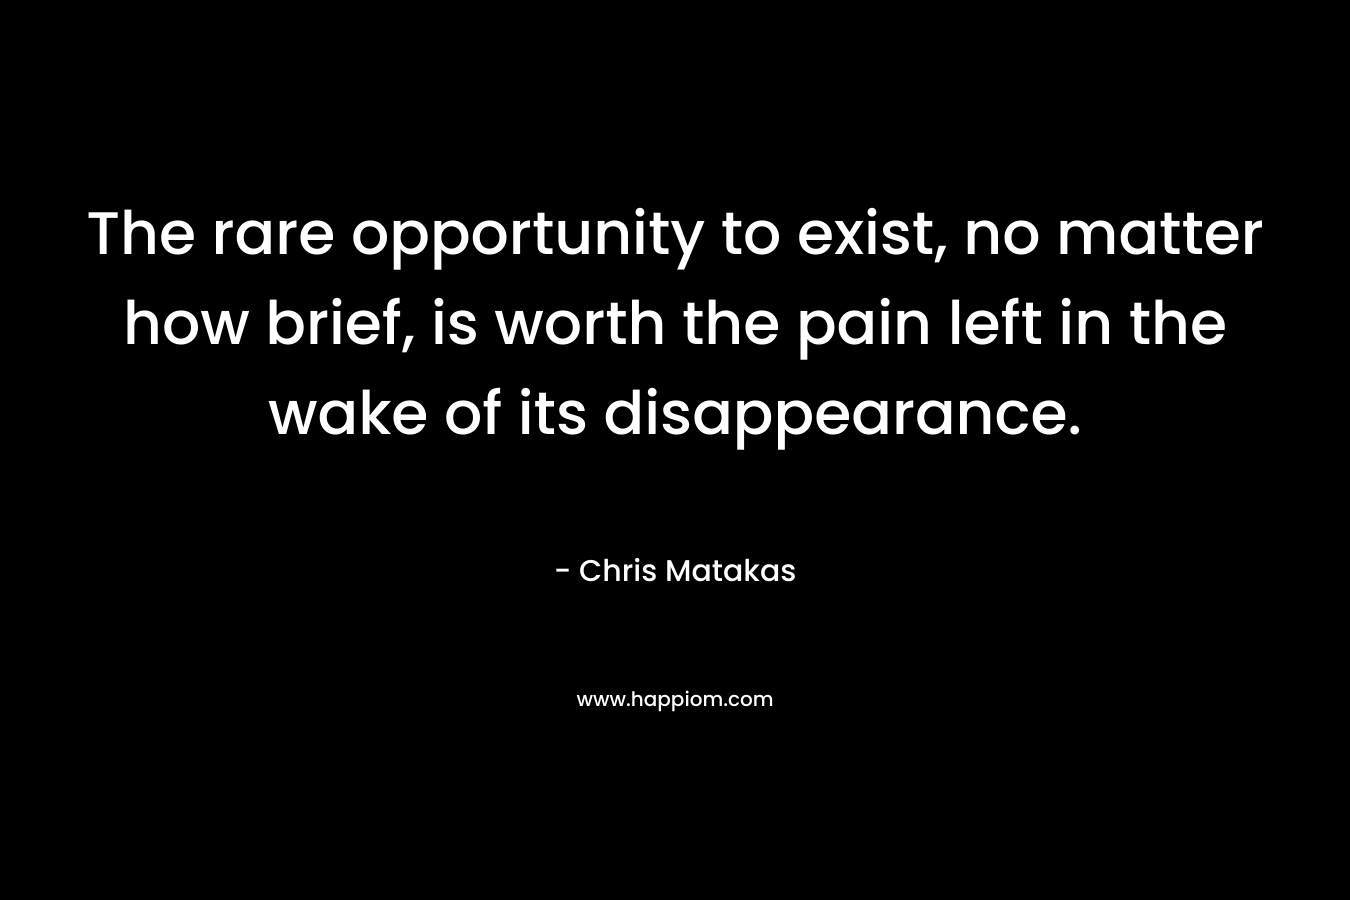 The rare opportunity to exist, no matter how brief, is worth the pain left in the wake of its disappearance. – Chris Matakas